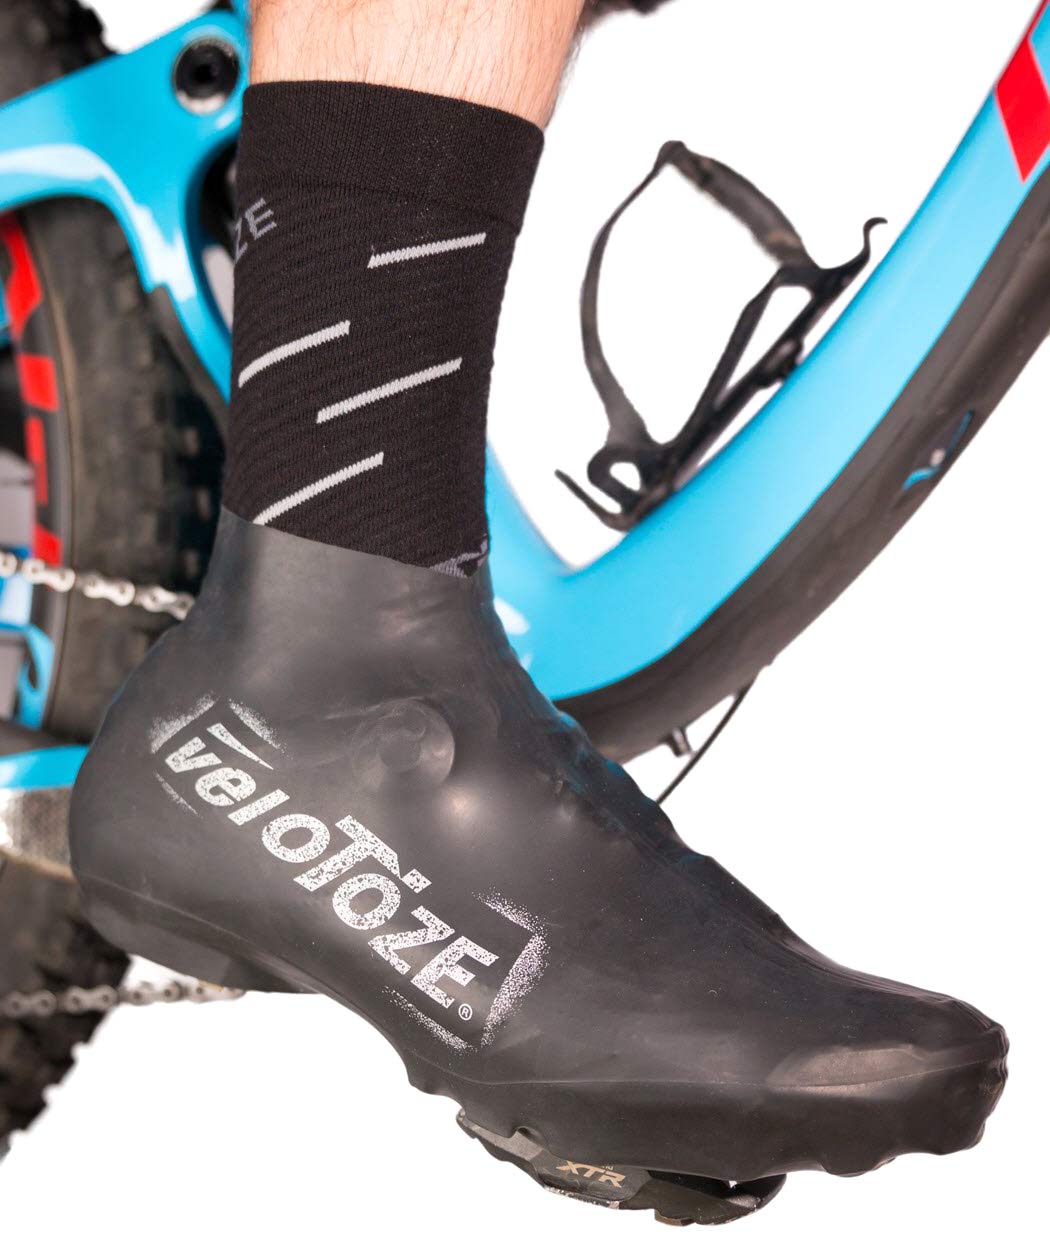 VeloToze stretch off-road with MTB-ready latex shoe covers Bikerumor